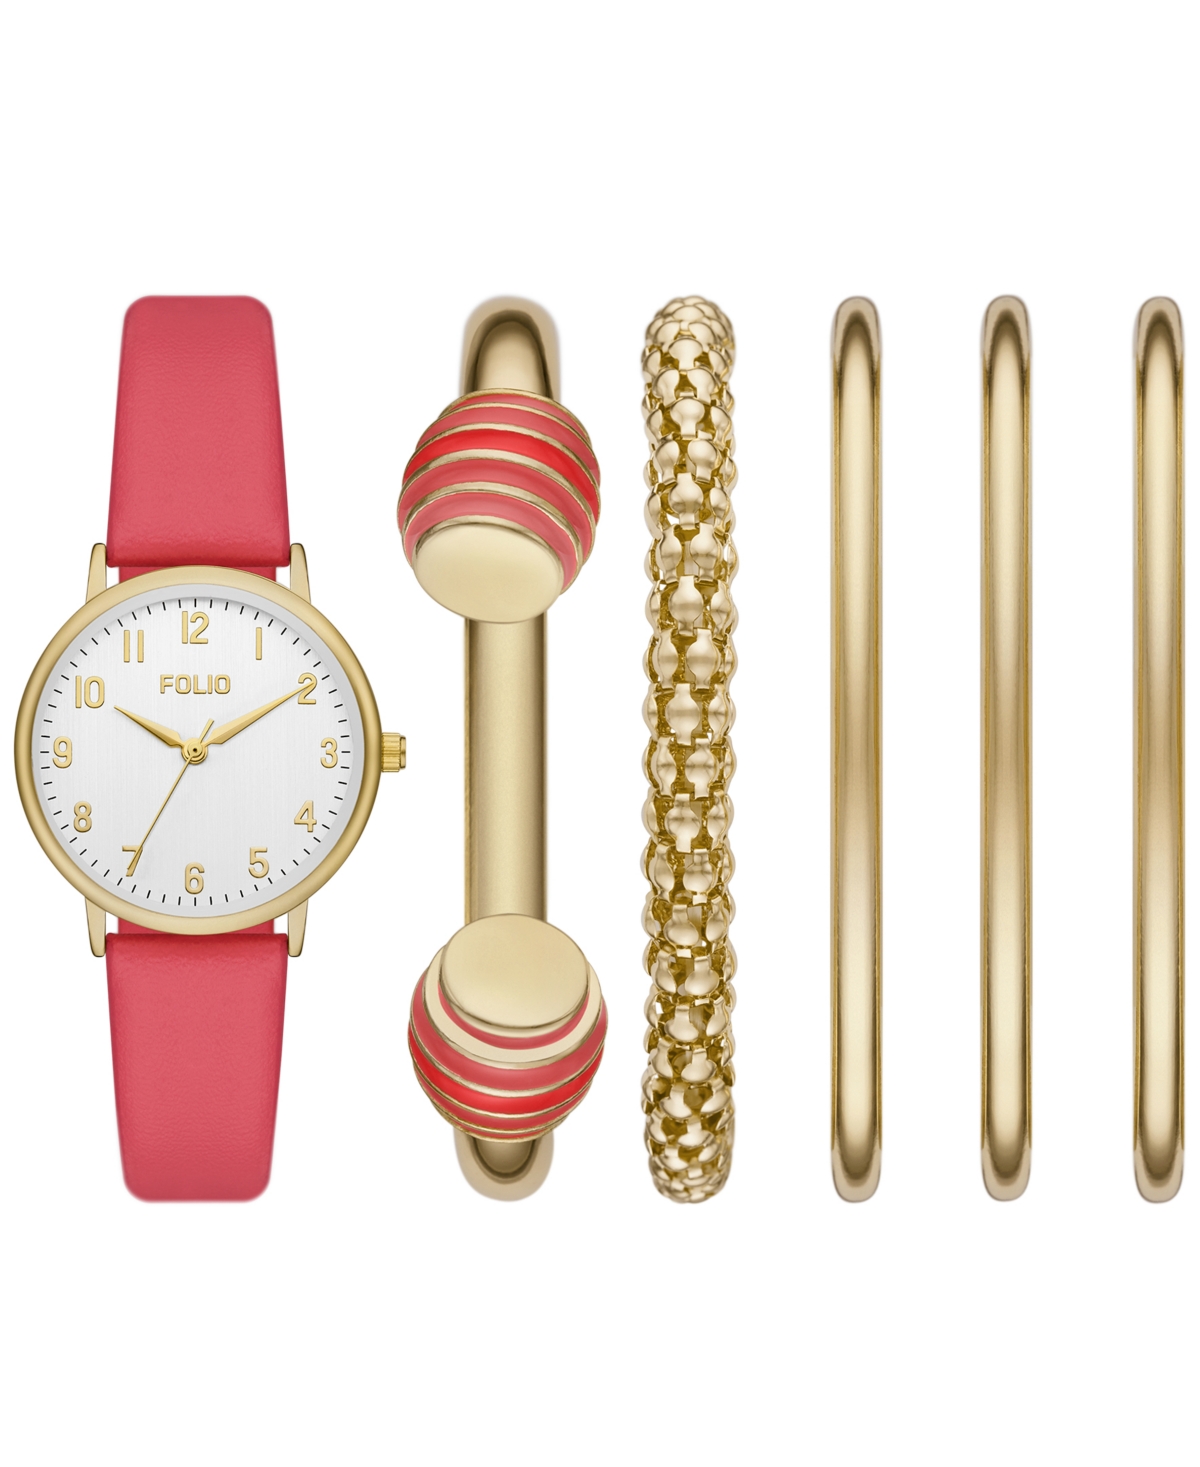 Women's Three Hand Gold-Tone 32mm Watch and Bracelet Gift Set, 6 Pieces - Gold